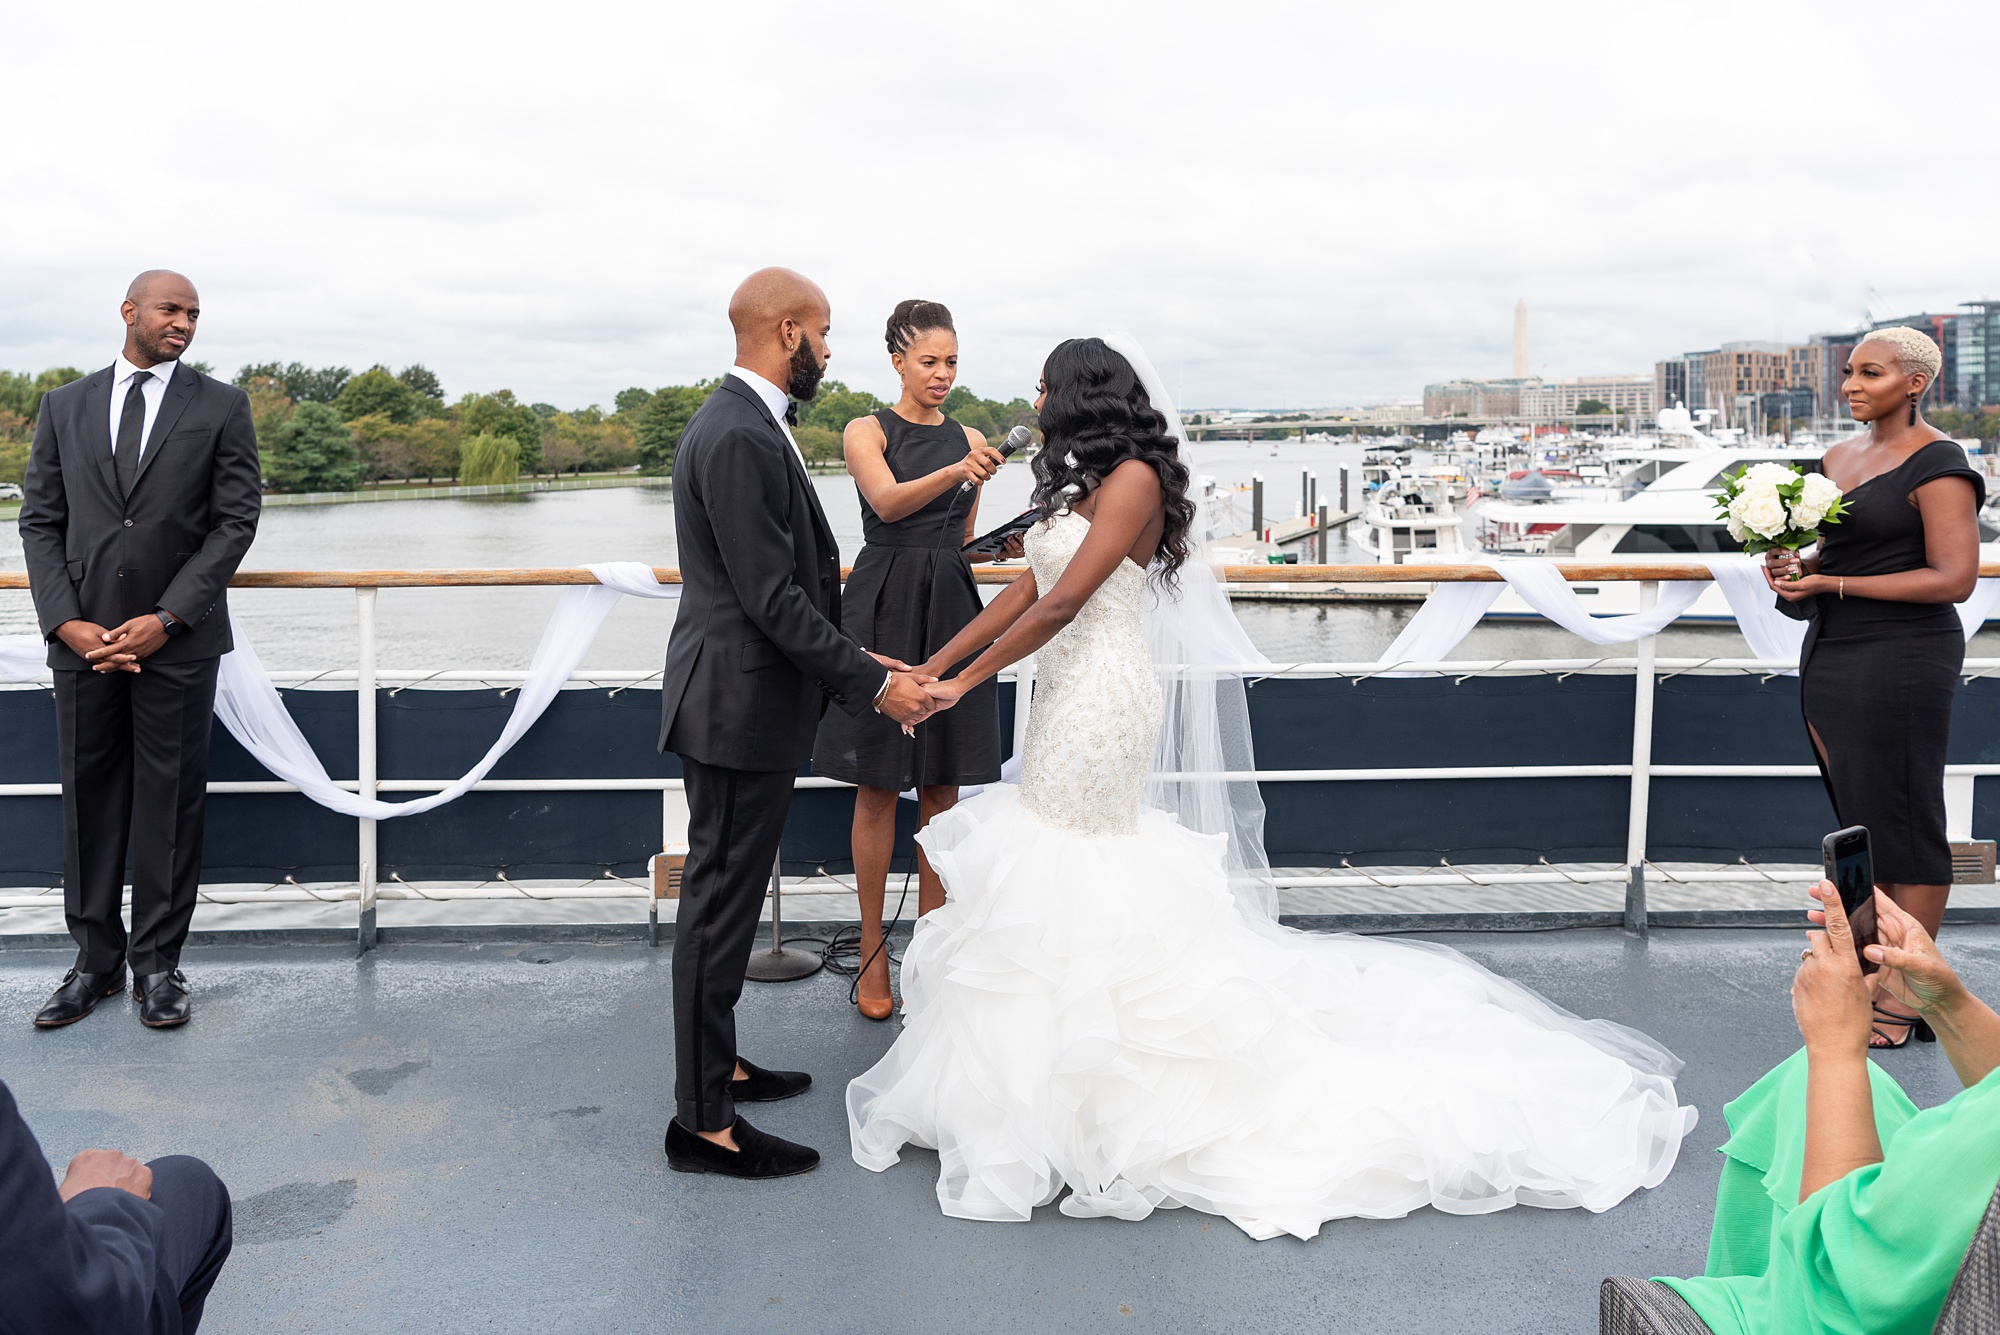 newlyweds have vow renewal on boat in Washington DC